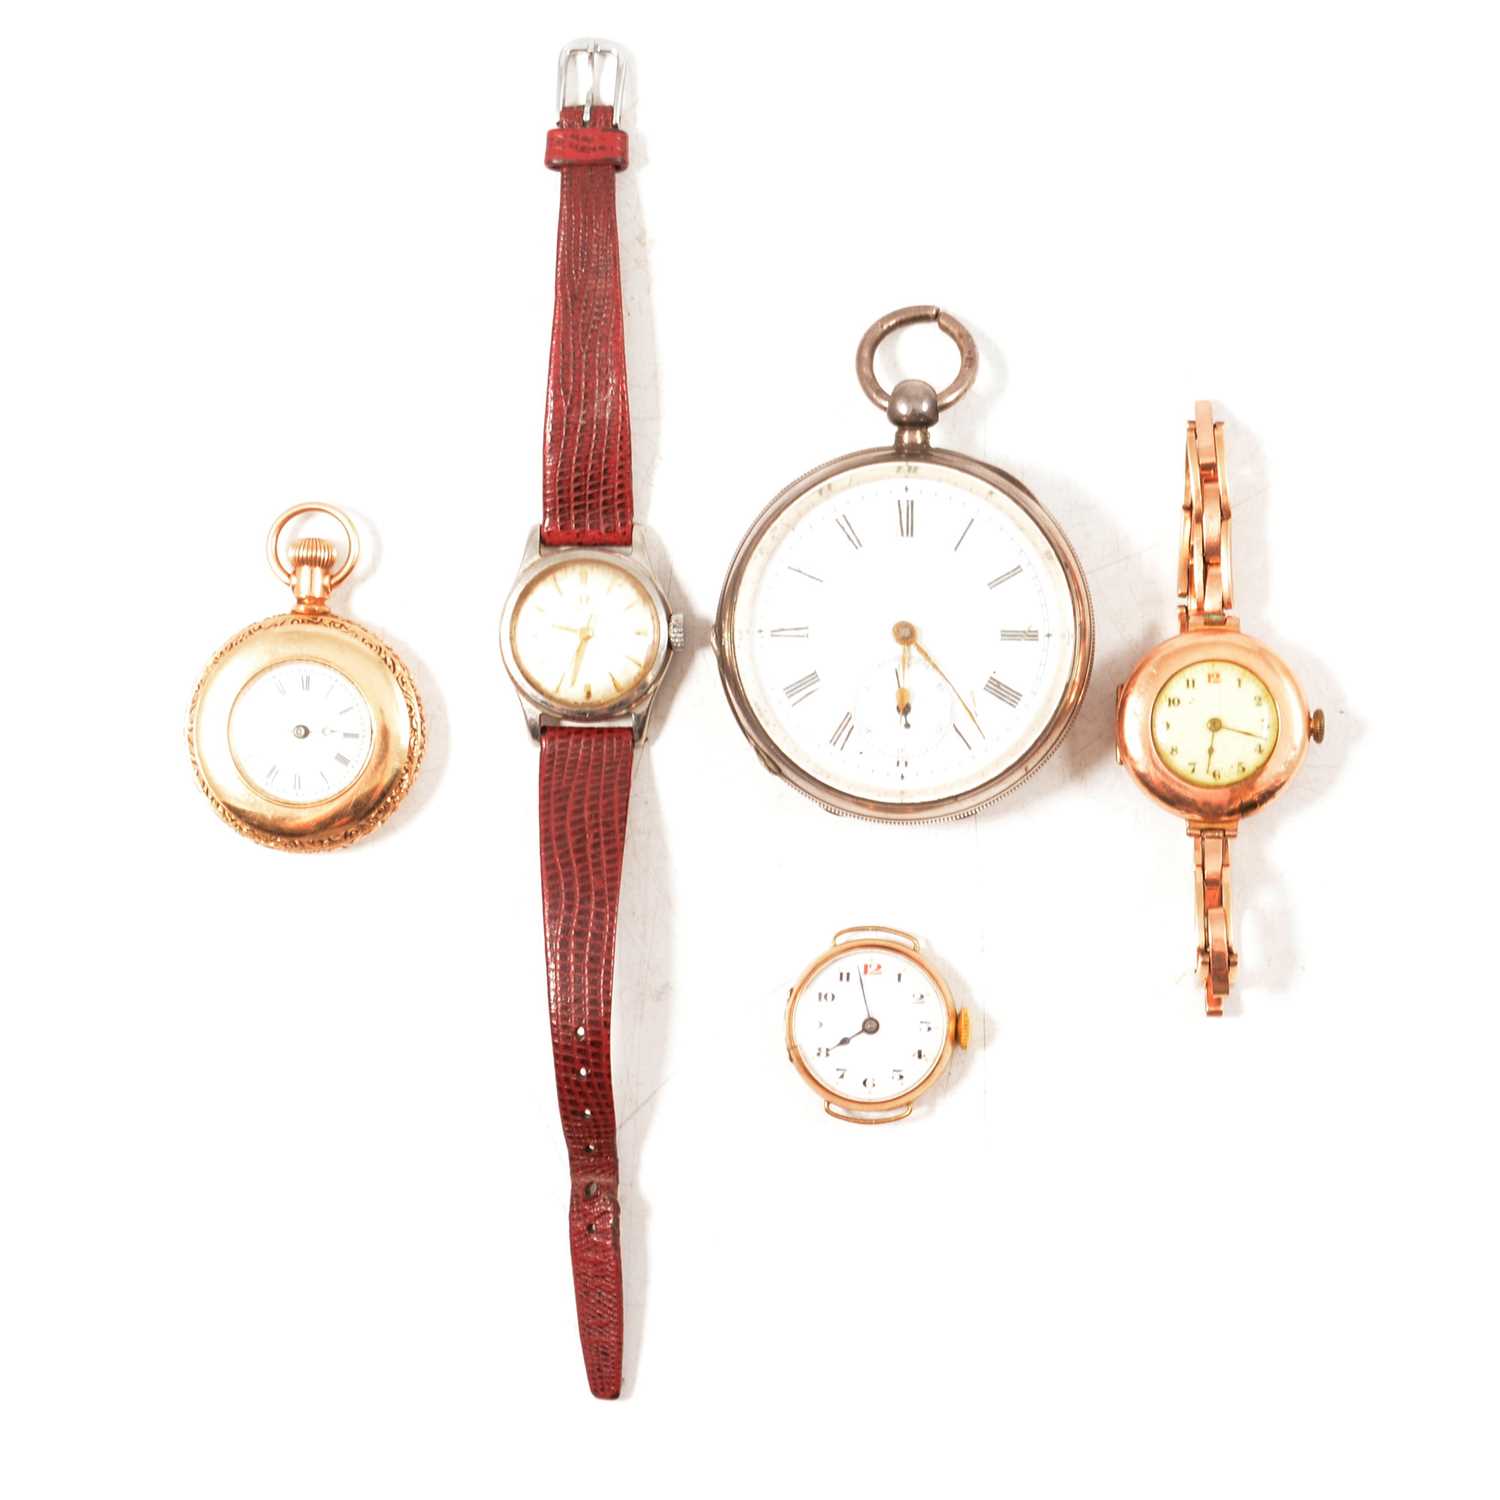 A silver pocket watch, lady's Omega wristwatch, gold coloured fob watch and two gold wristwatches.